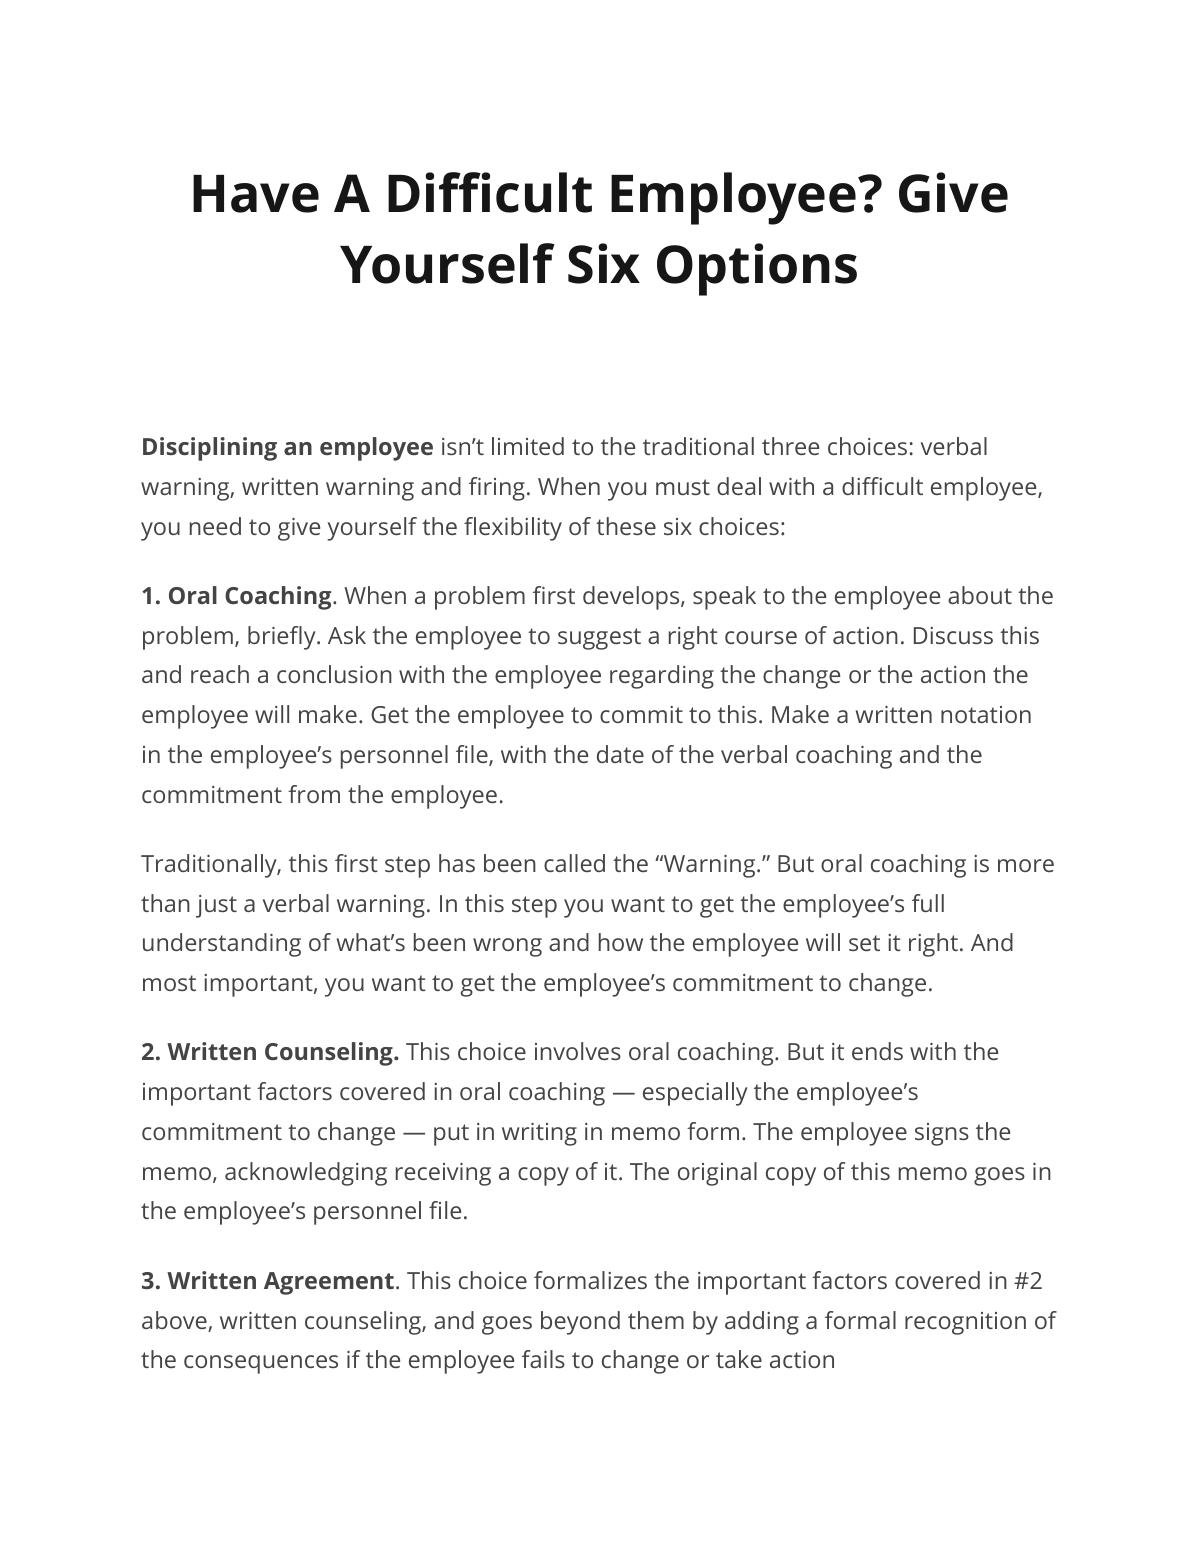 Have A Difficult Employee? Give Yourself Six Options 